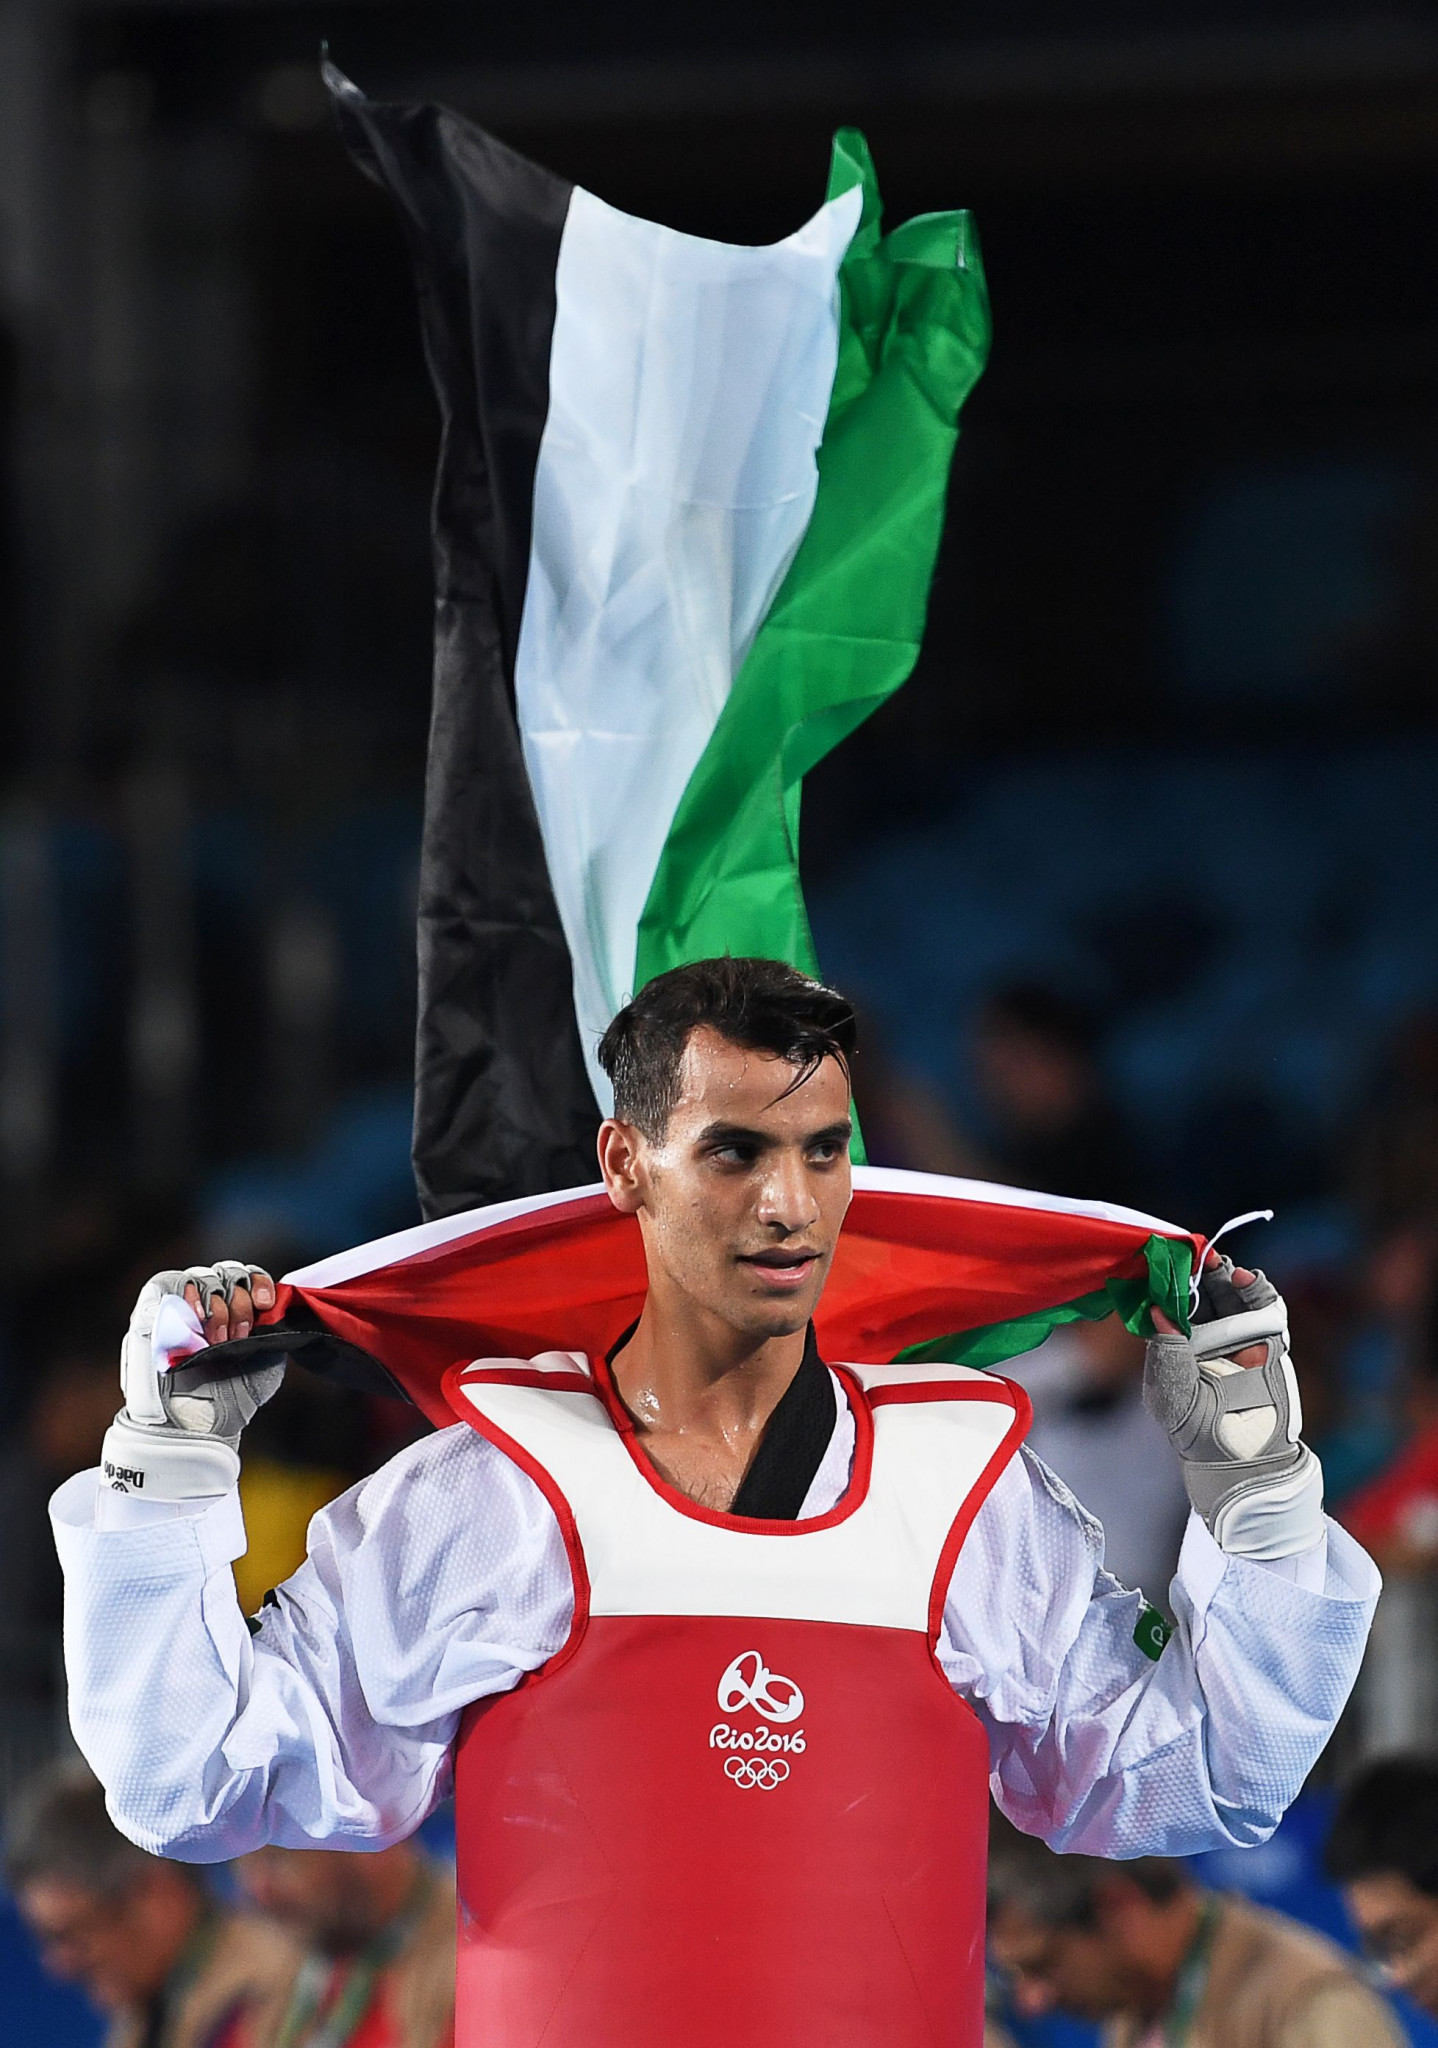 Ahmad Abughaush won Jordan's first Olympic gold medal at Rio 2016 ©Getty Images